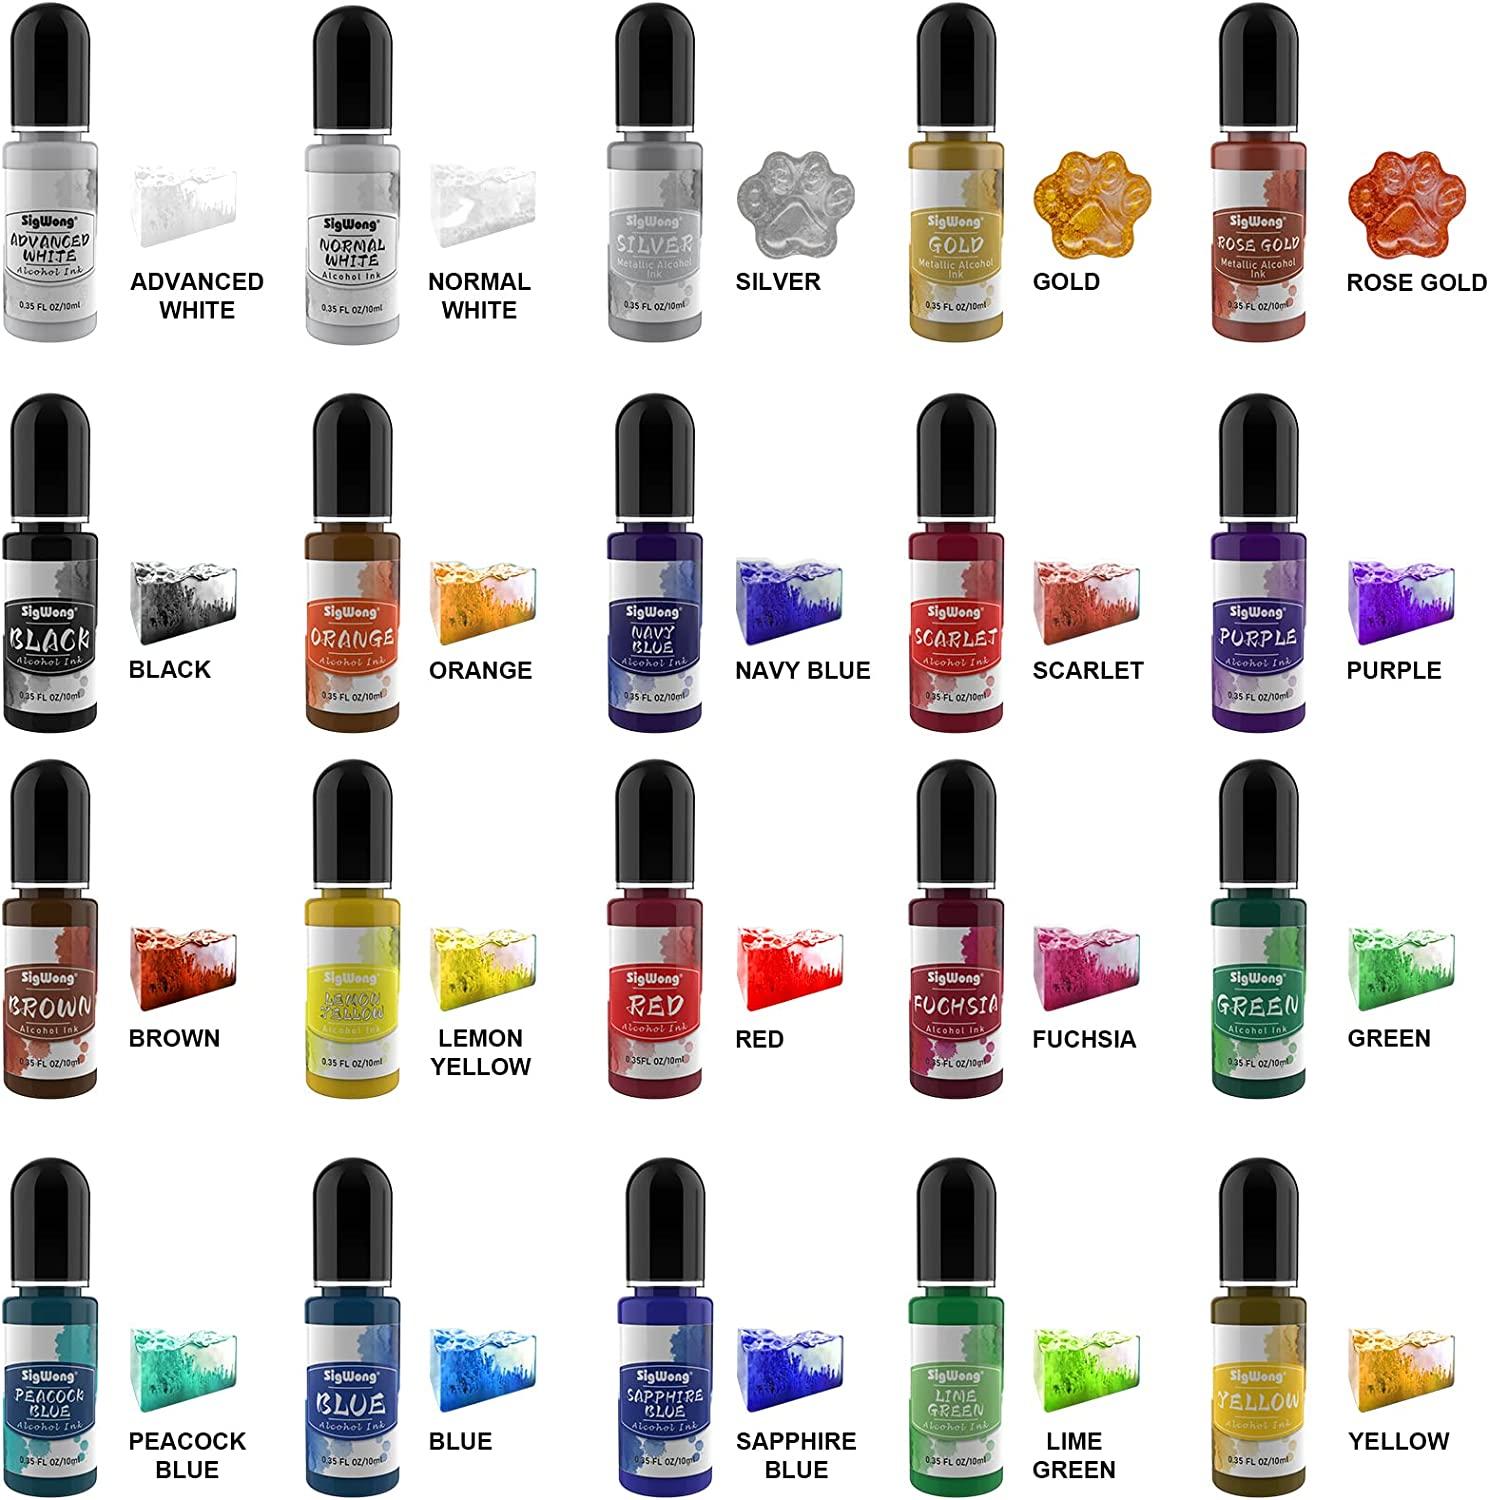 Alcohol Ink Set - 20 Bottles Vibrant Colors High Concentrated